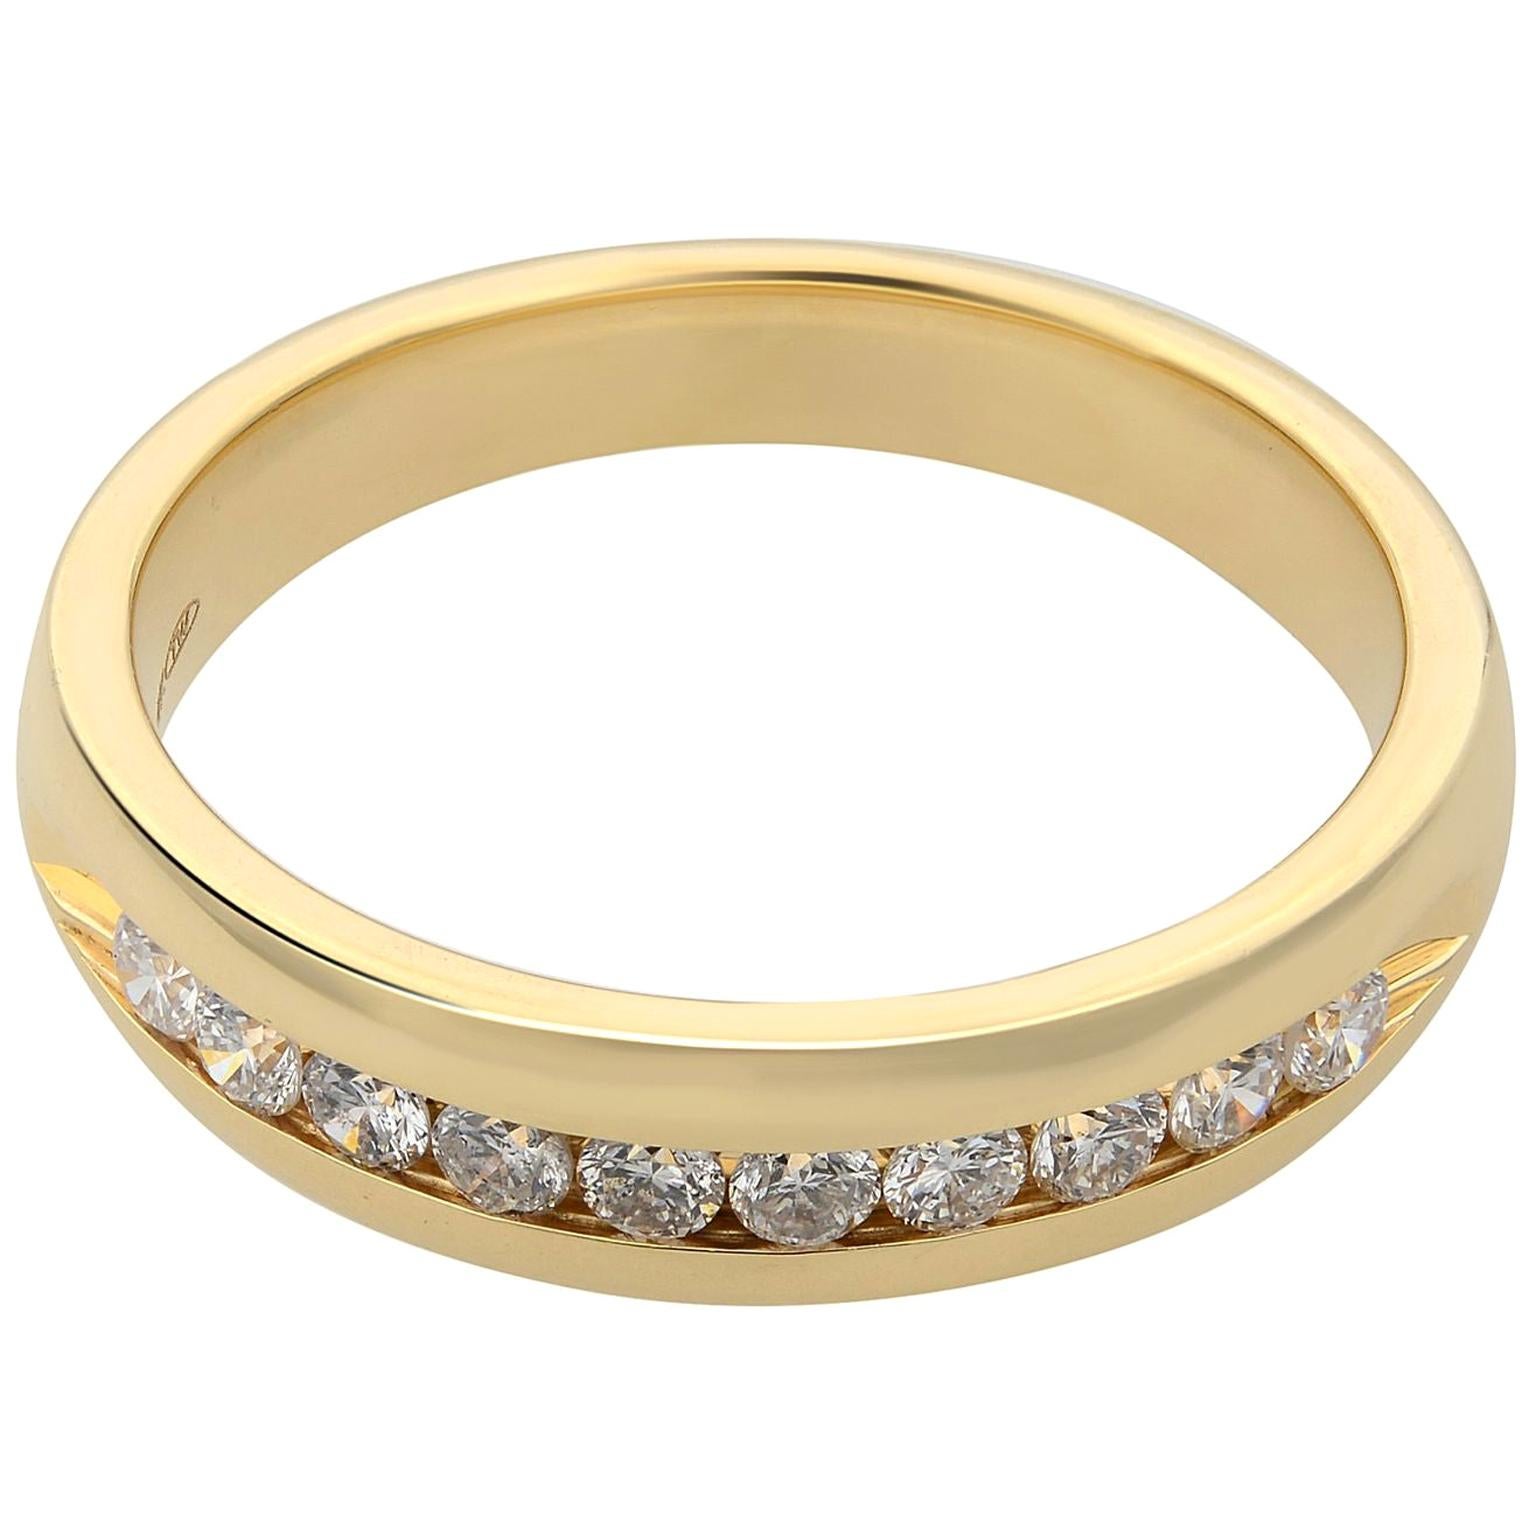 This 14k yellow gold Men's wedding band is 5.50mm wide and features 10 round cut diamonds in a channel setting. The ring has a high polished satin finish and rounded edges for a comfort-fit. Approximately 0.66 carat total diamond carat weight.